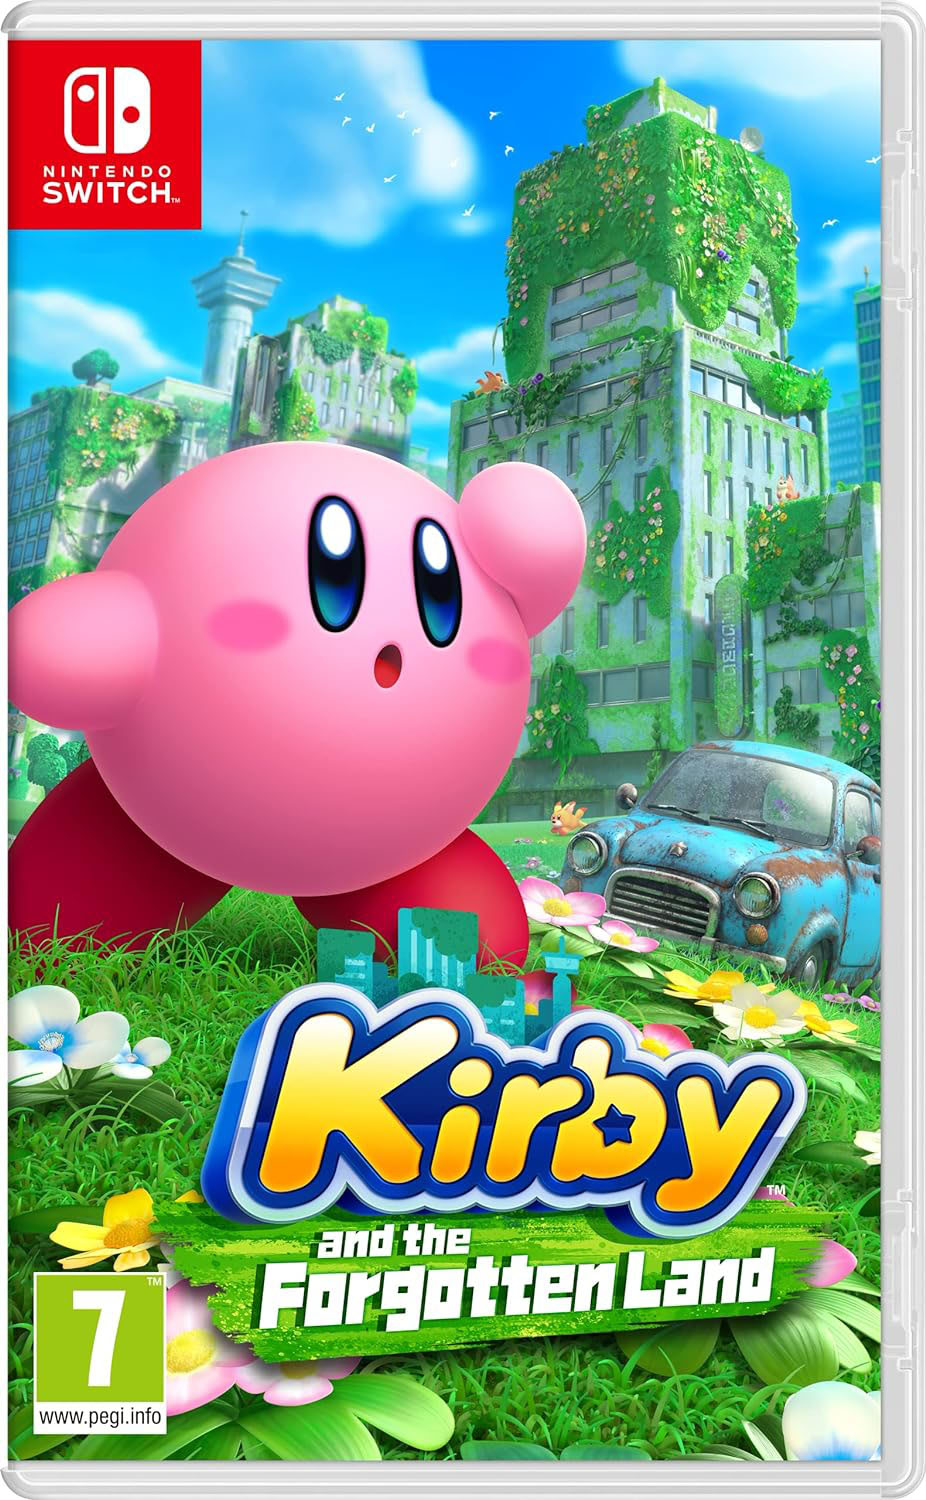 Kirby on grassy land in front of decayed, plant covered buildings